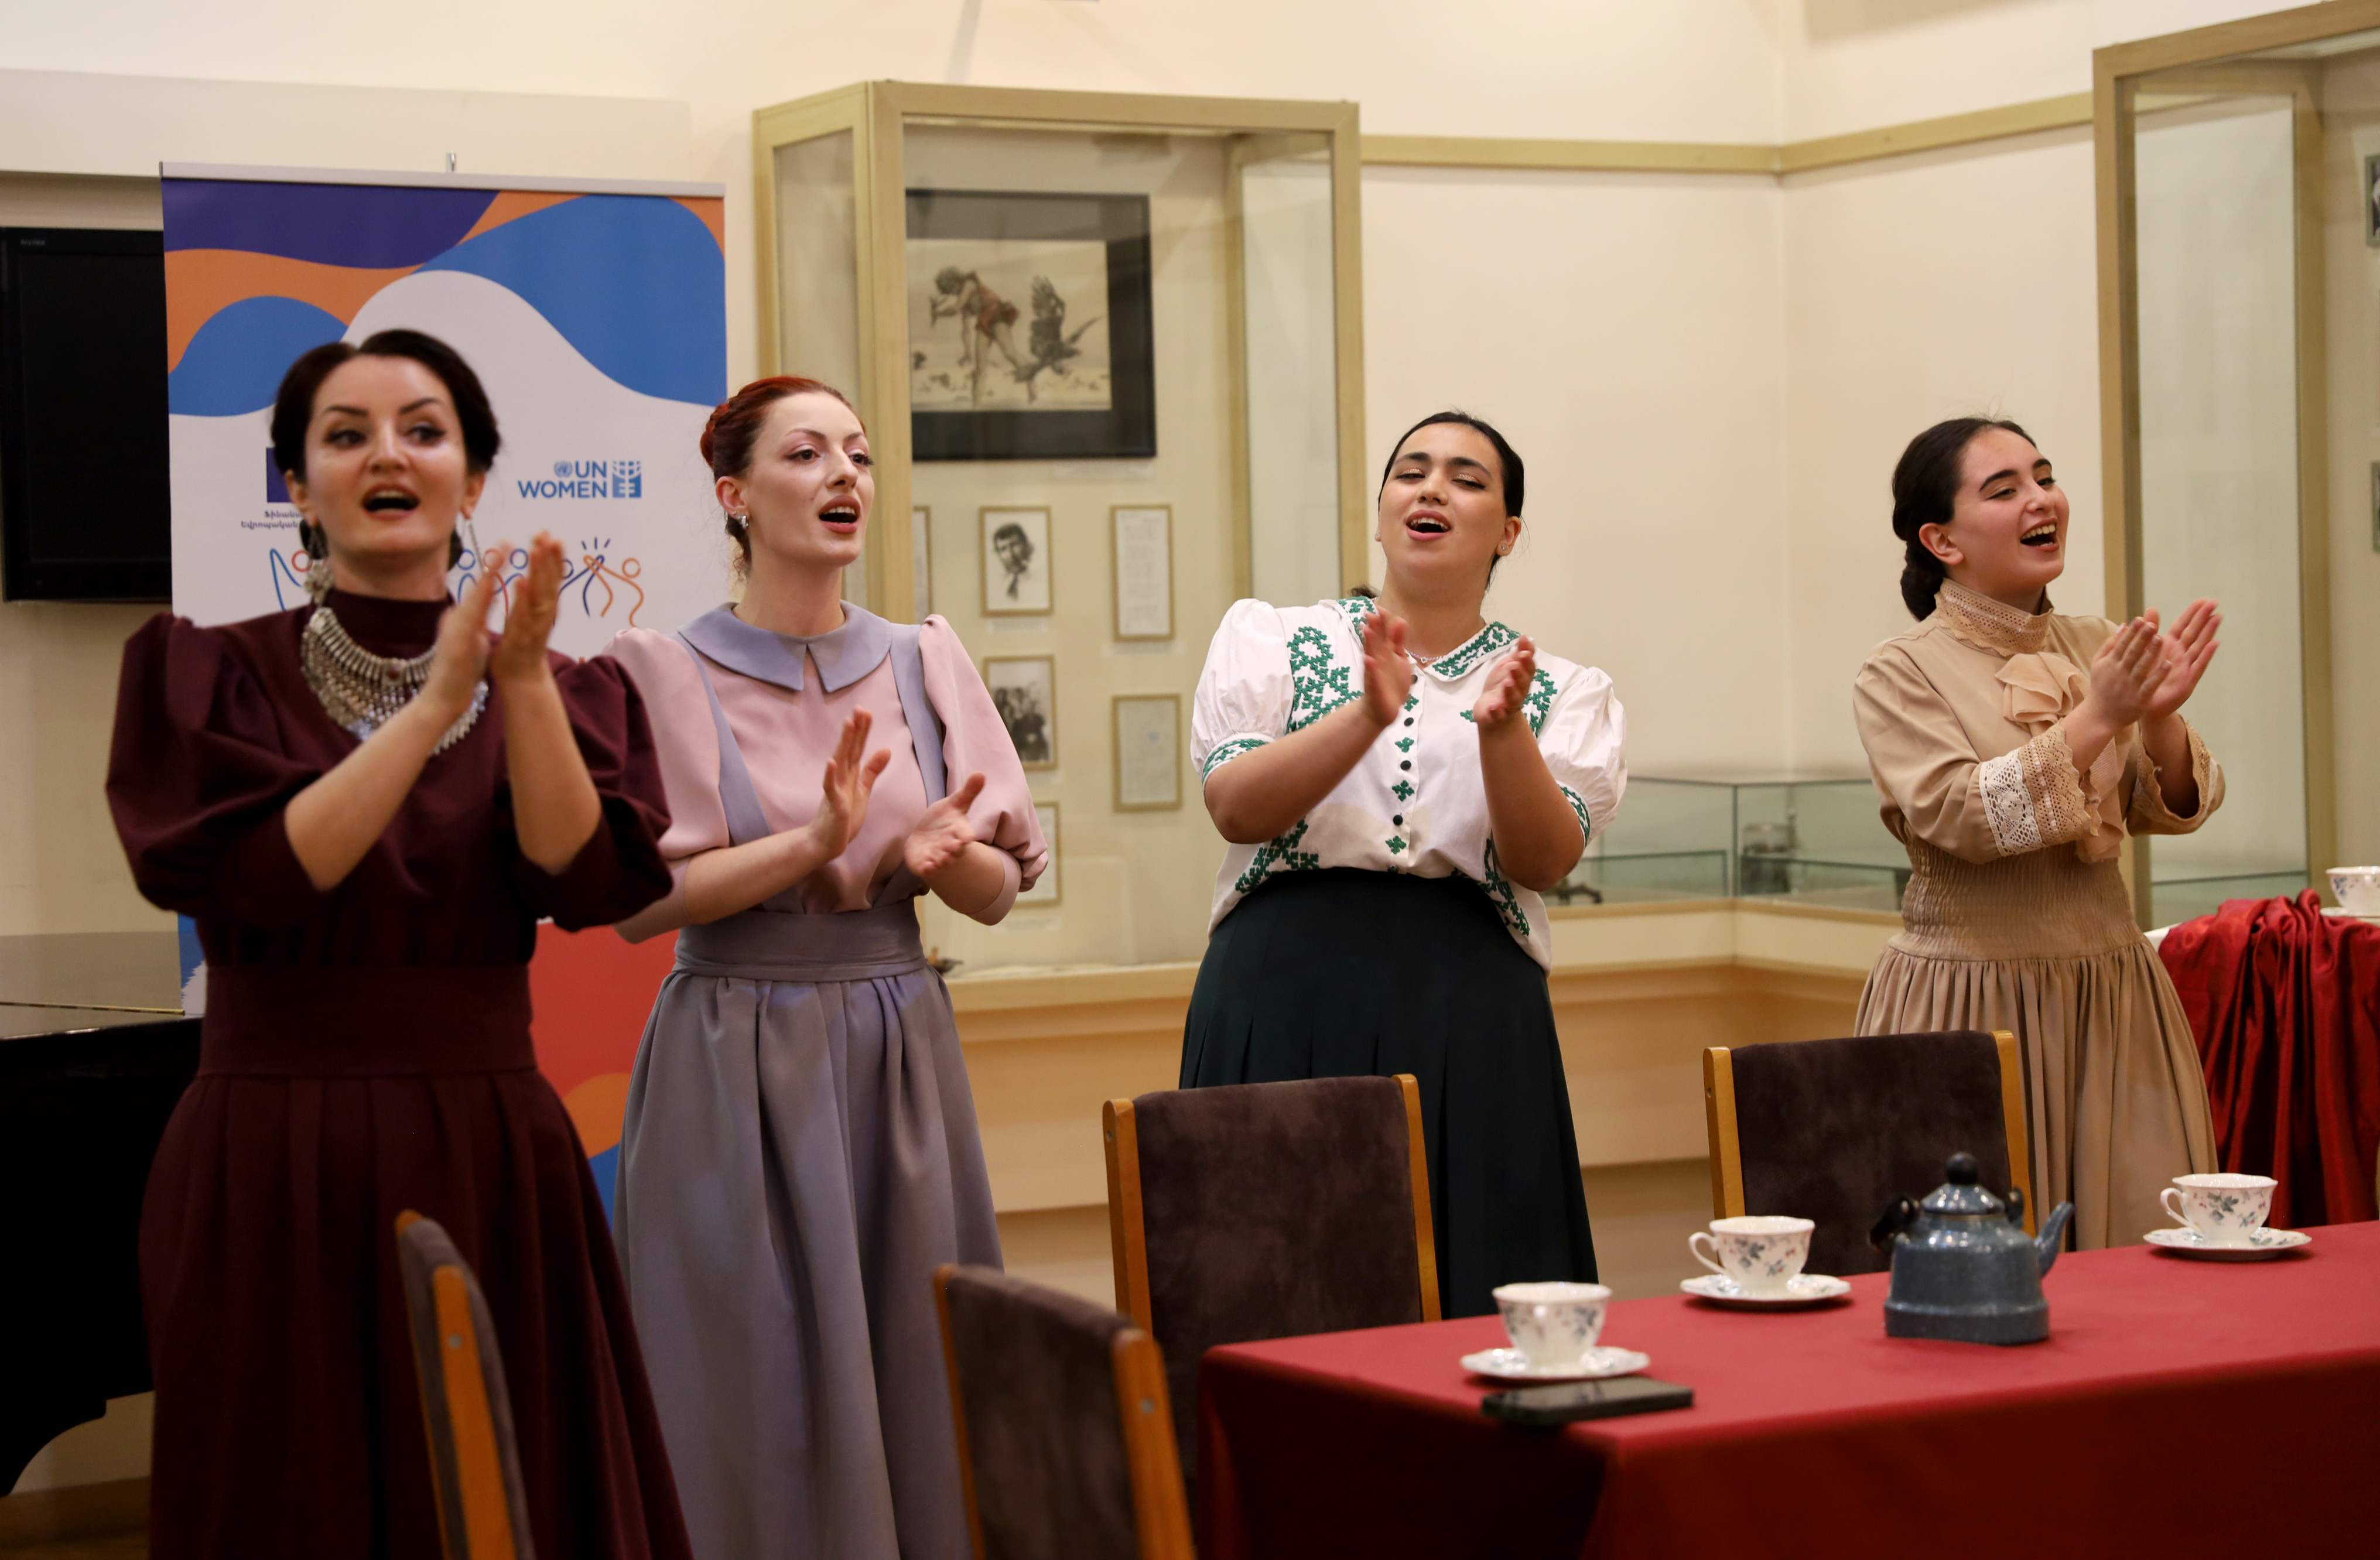 Photo shows four women in traditional clothing singing and clapping their hands